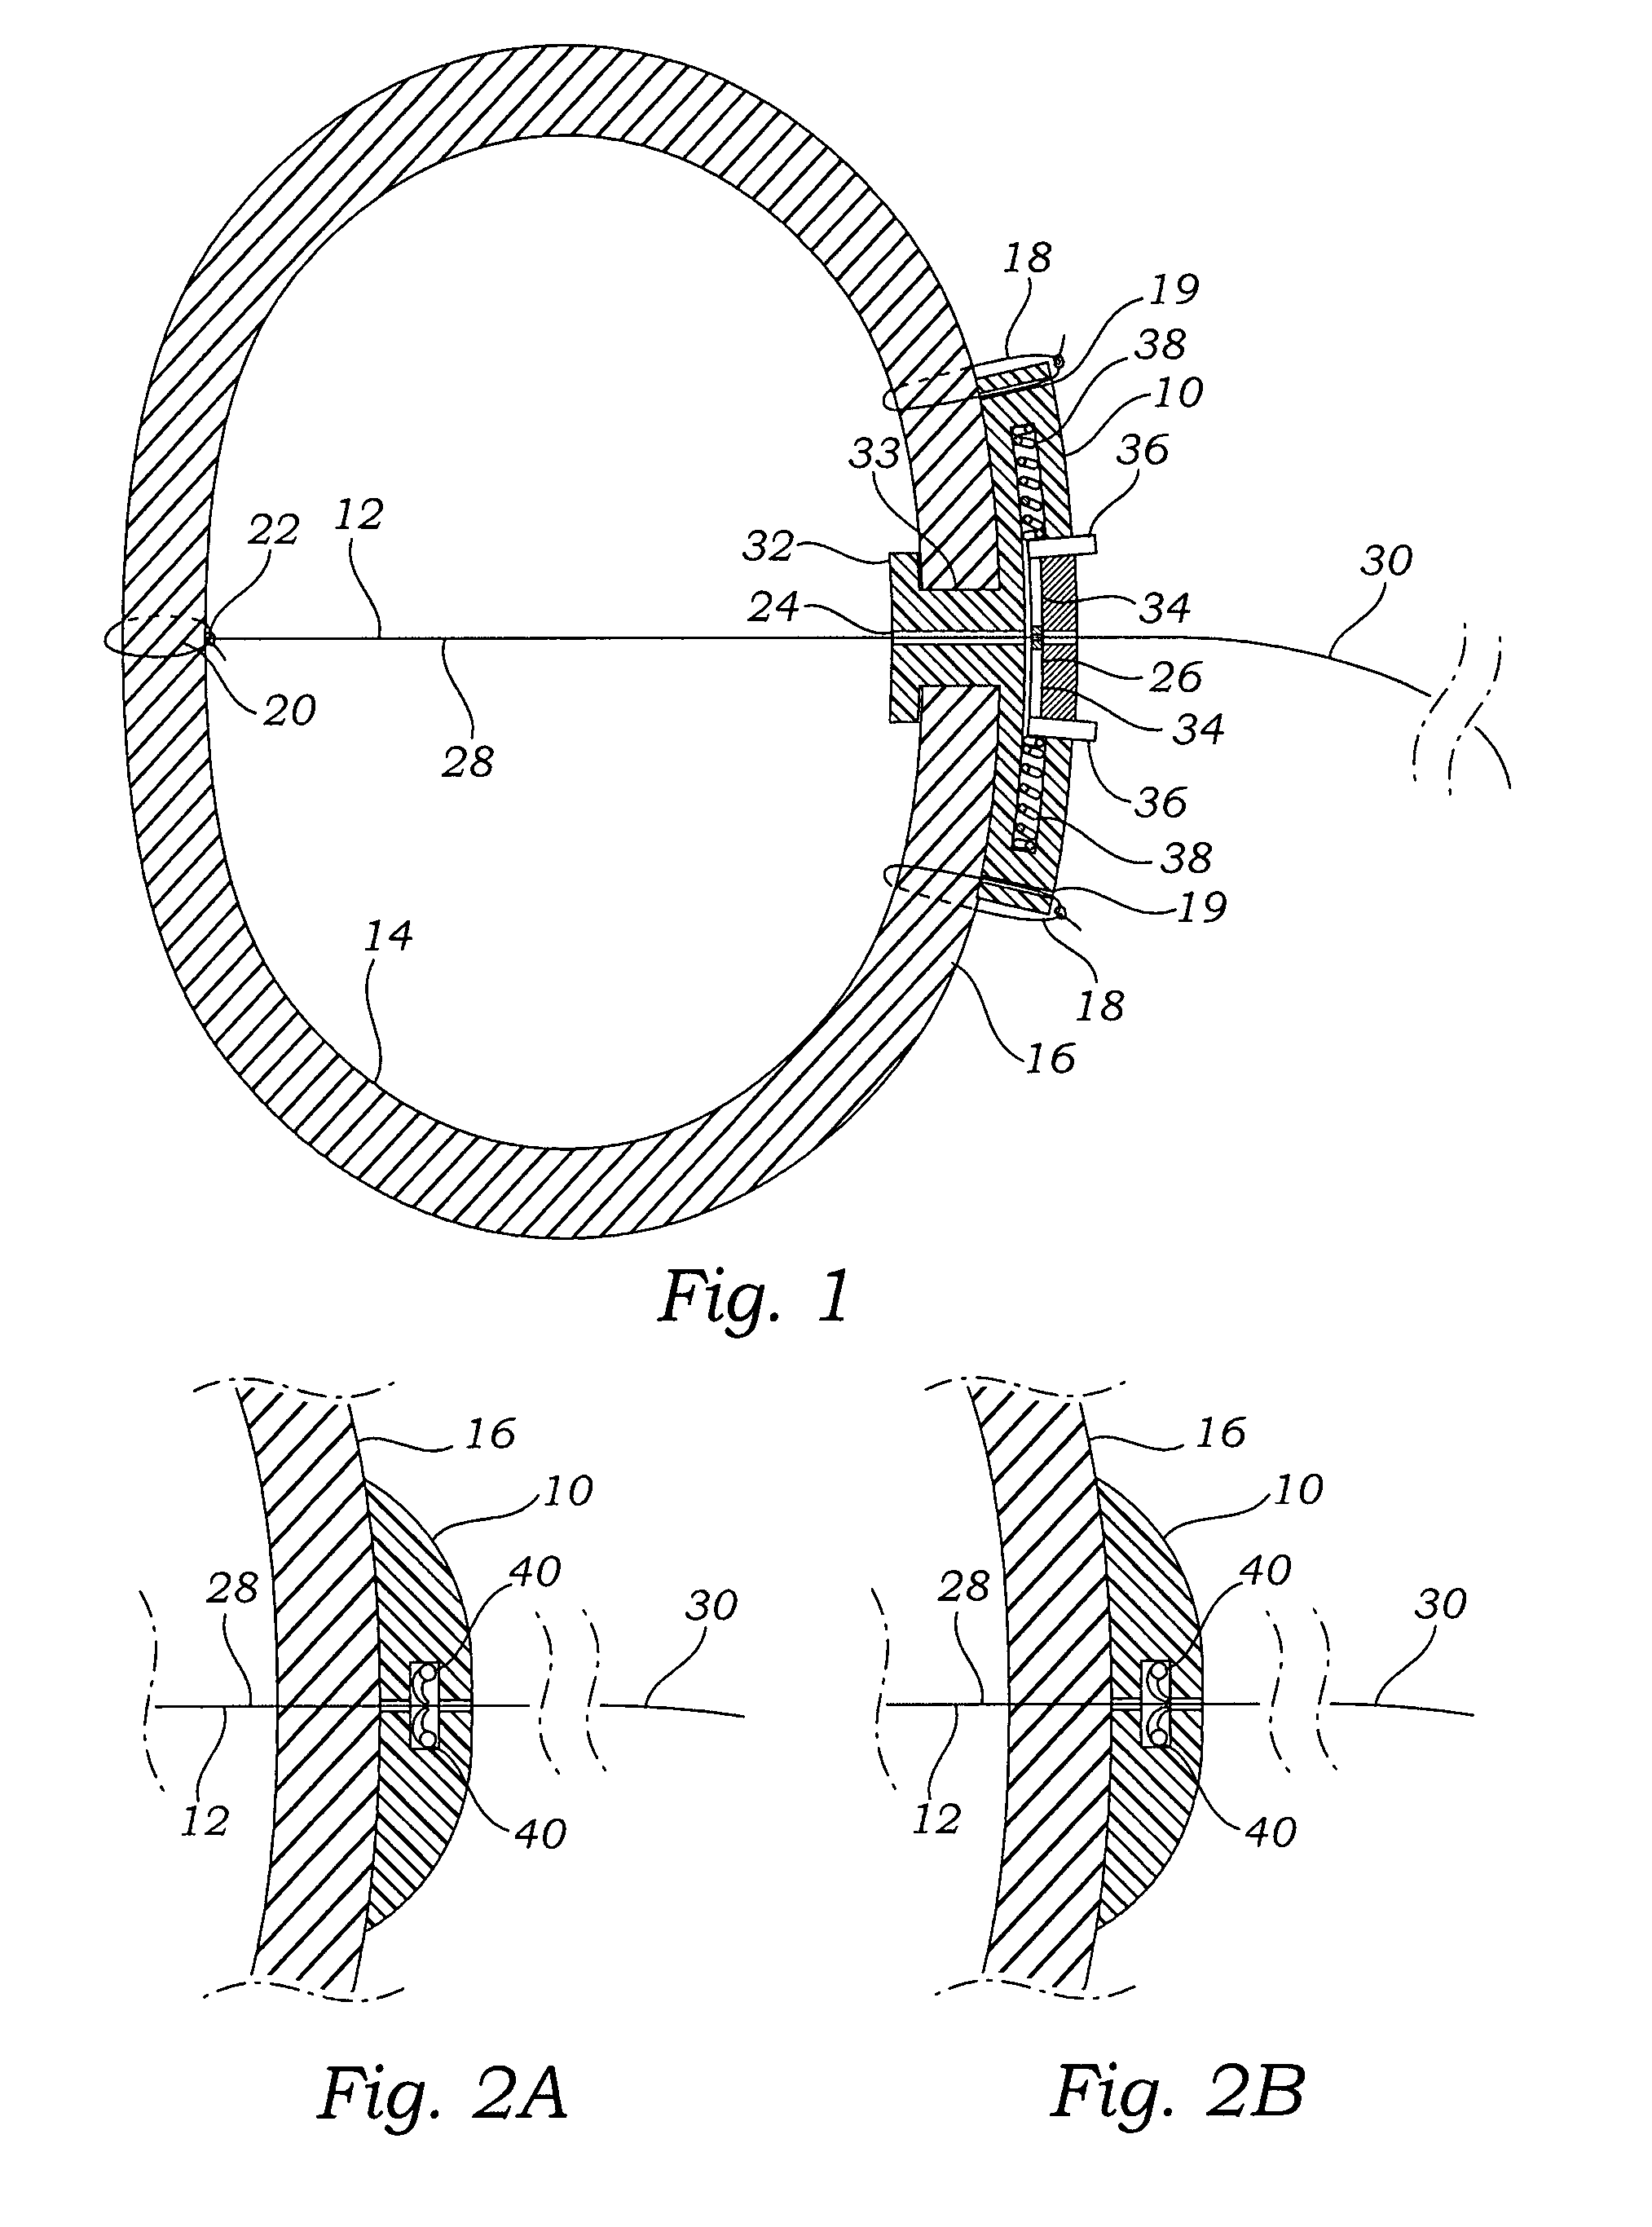 Apparatus, system, and method for applying and adjusting a tensioning element to a hollow body organ